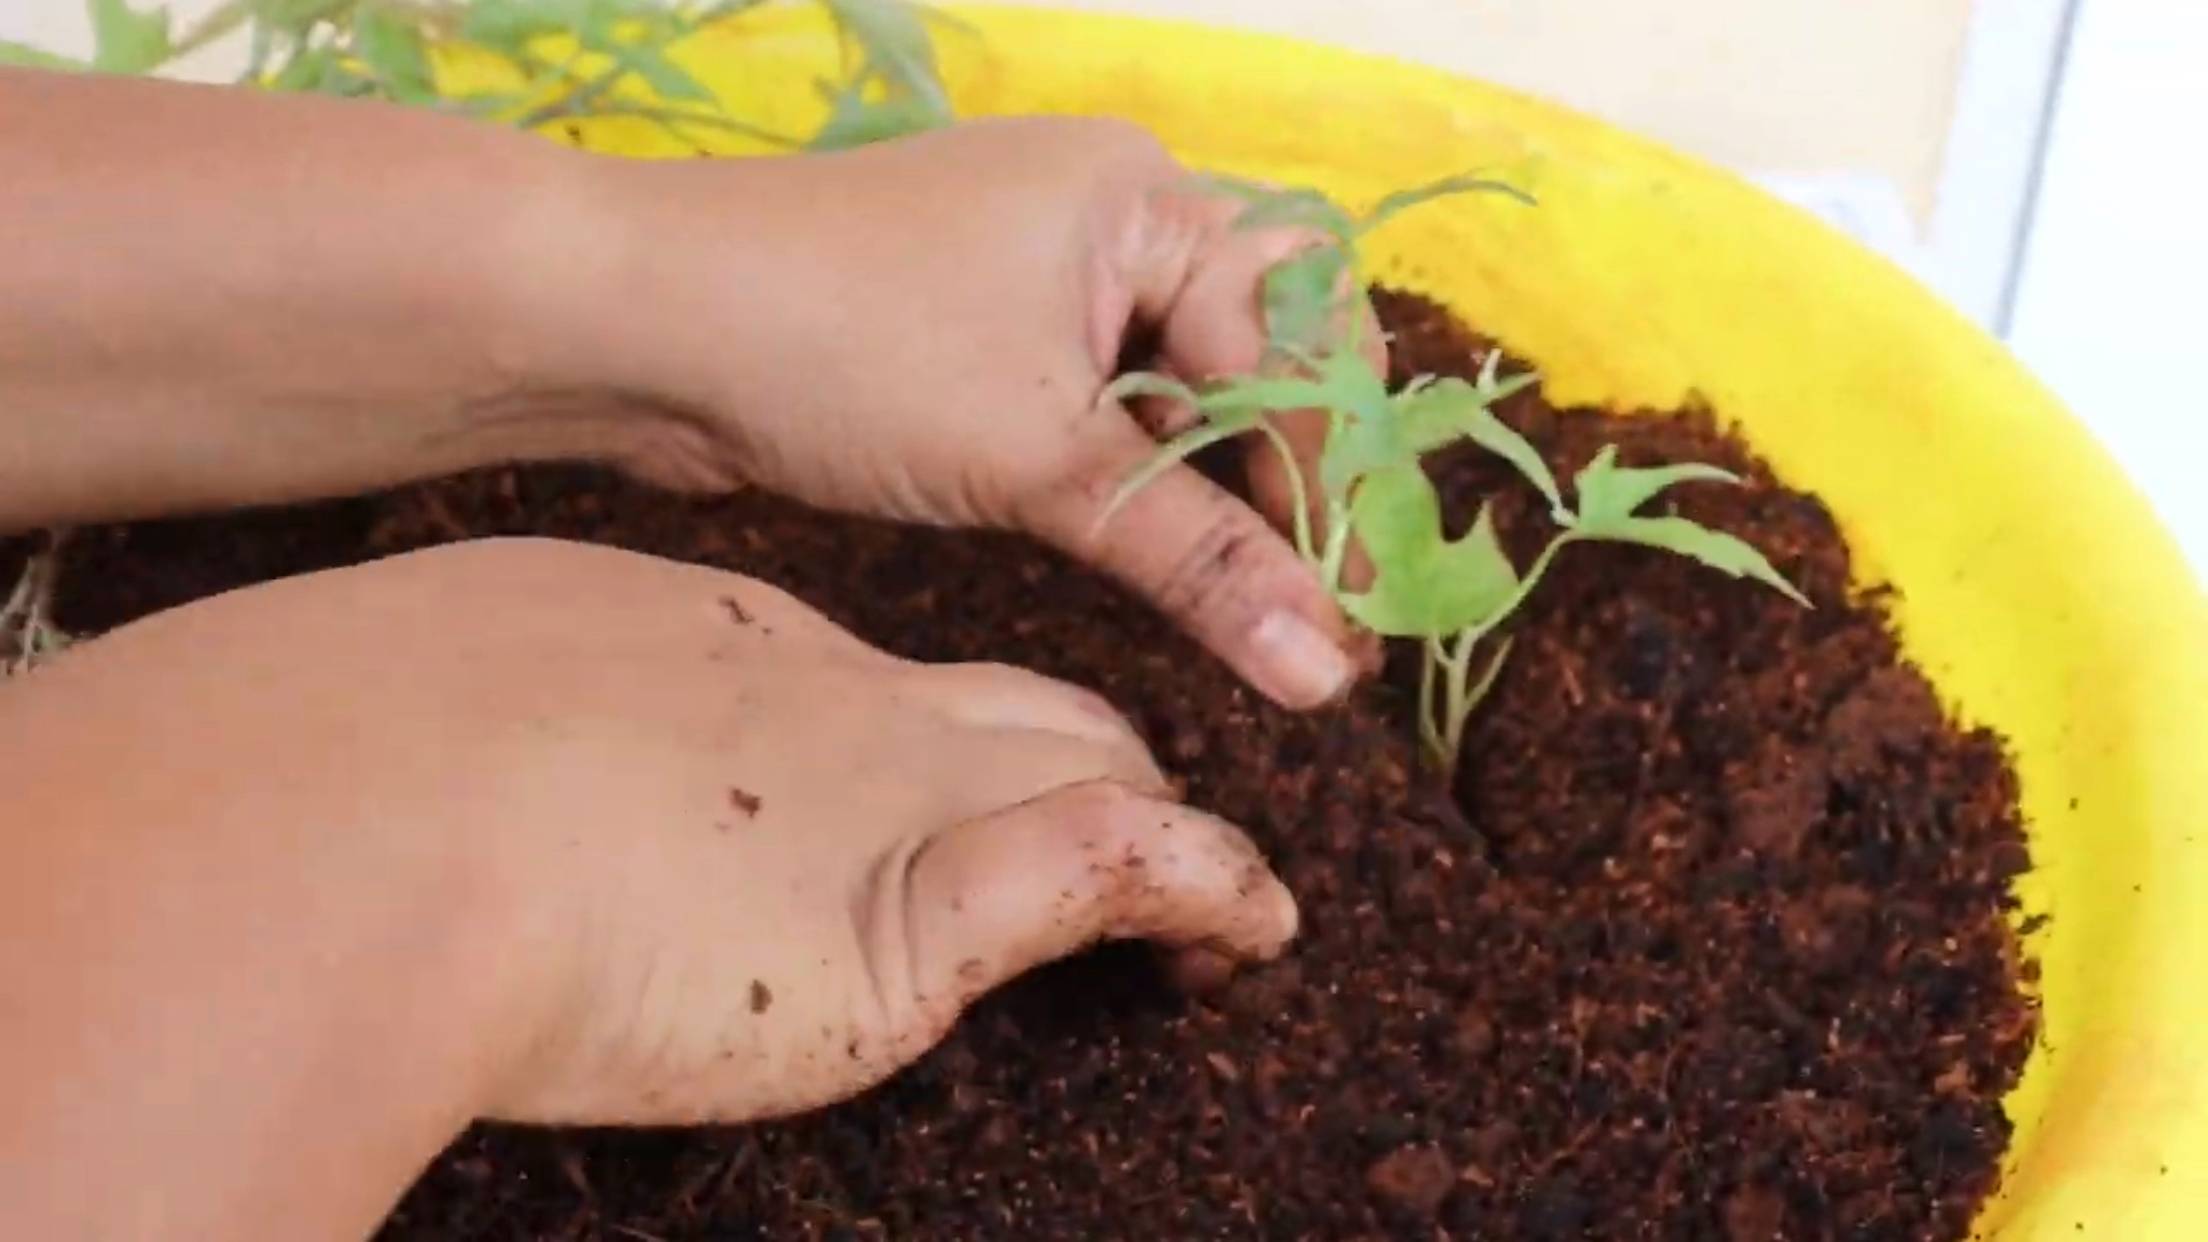 To grow sweet potato without seeds, Place the germinated shoots in the potting mix